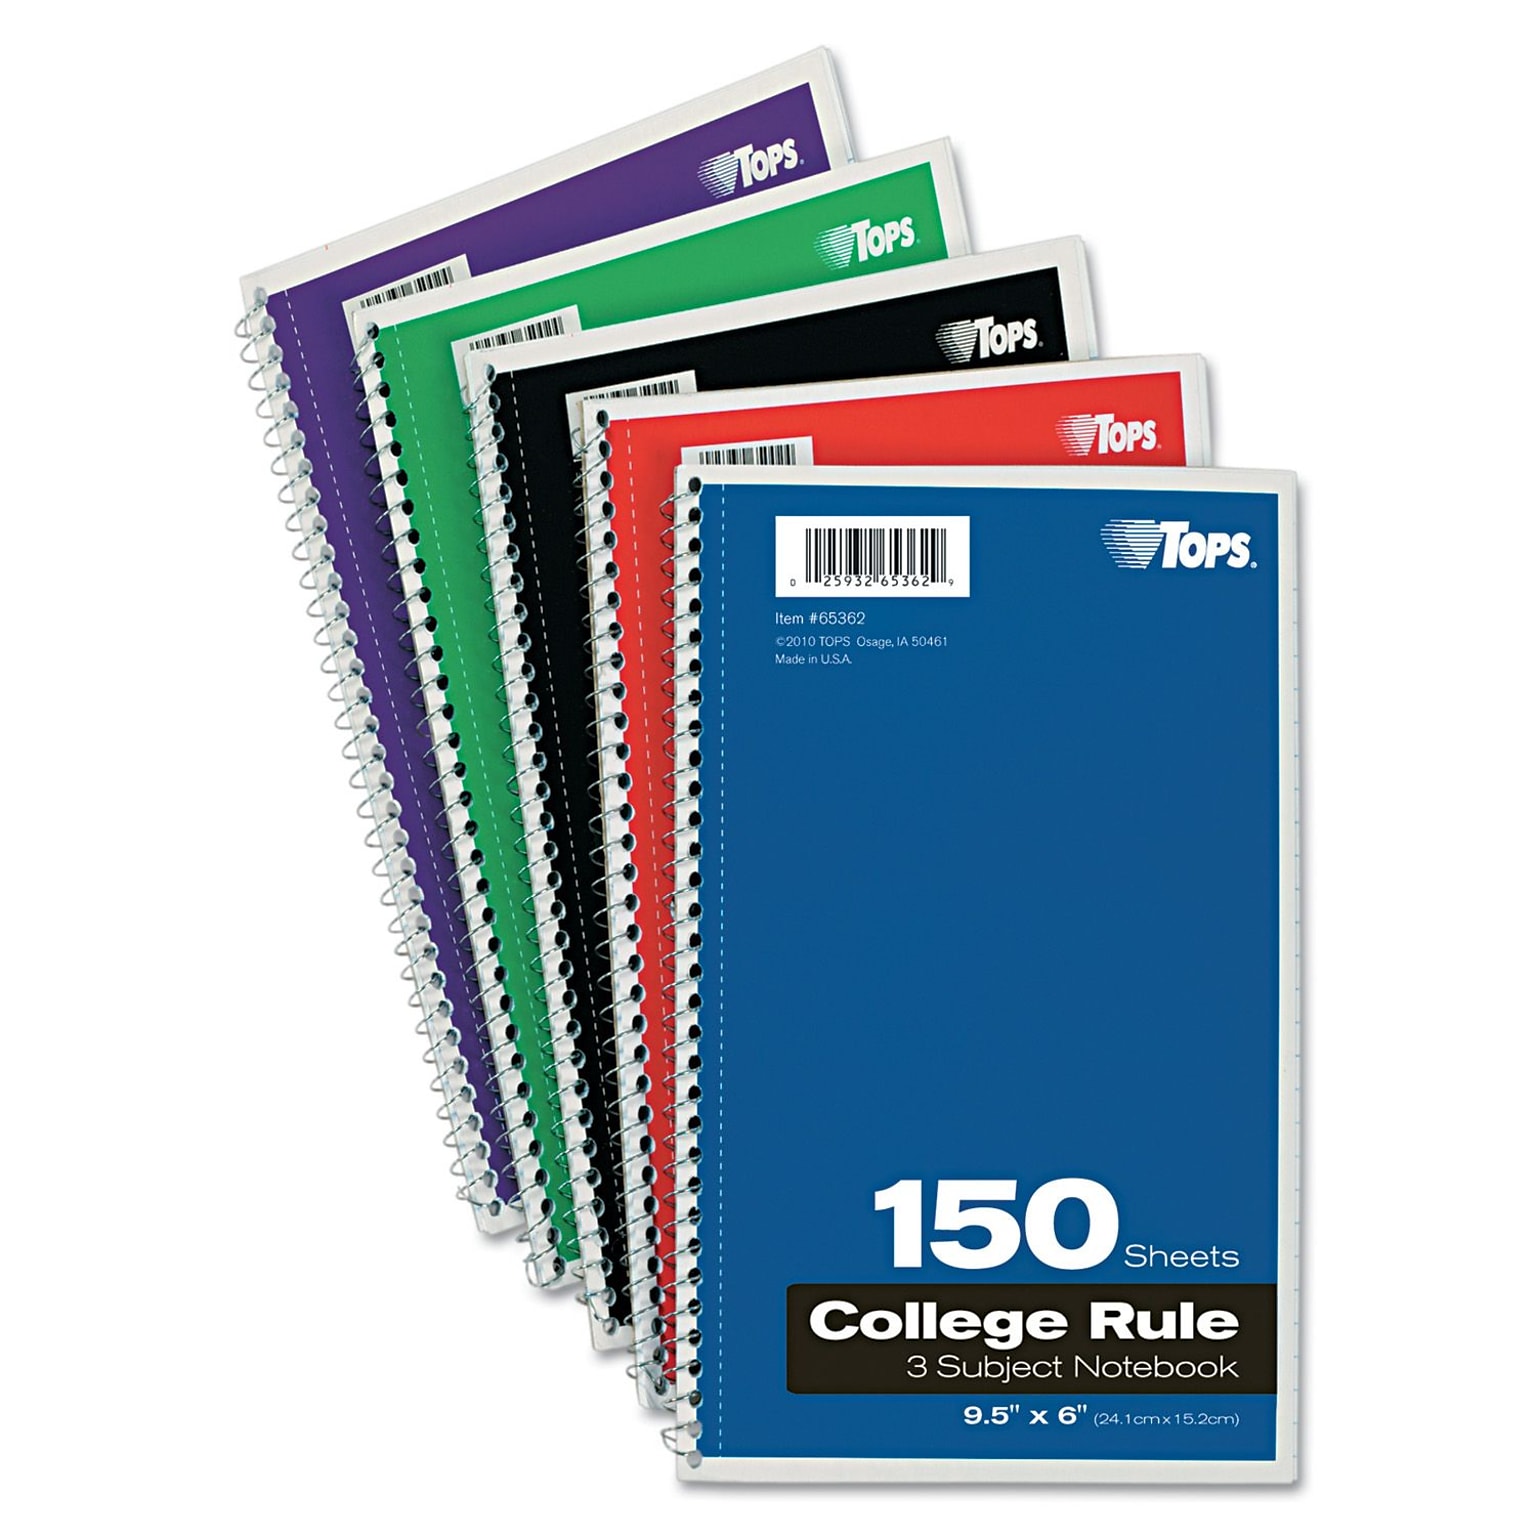 Oxford 3-Subject Notebook, 6 x 9 1/2, College Ruled, 150 Sheets, Assorted Colors (65362)